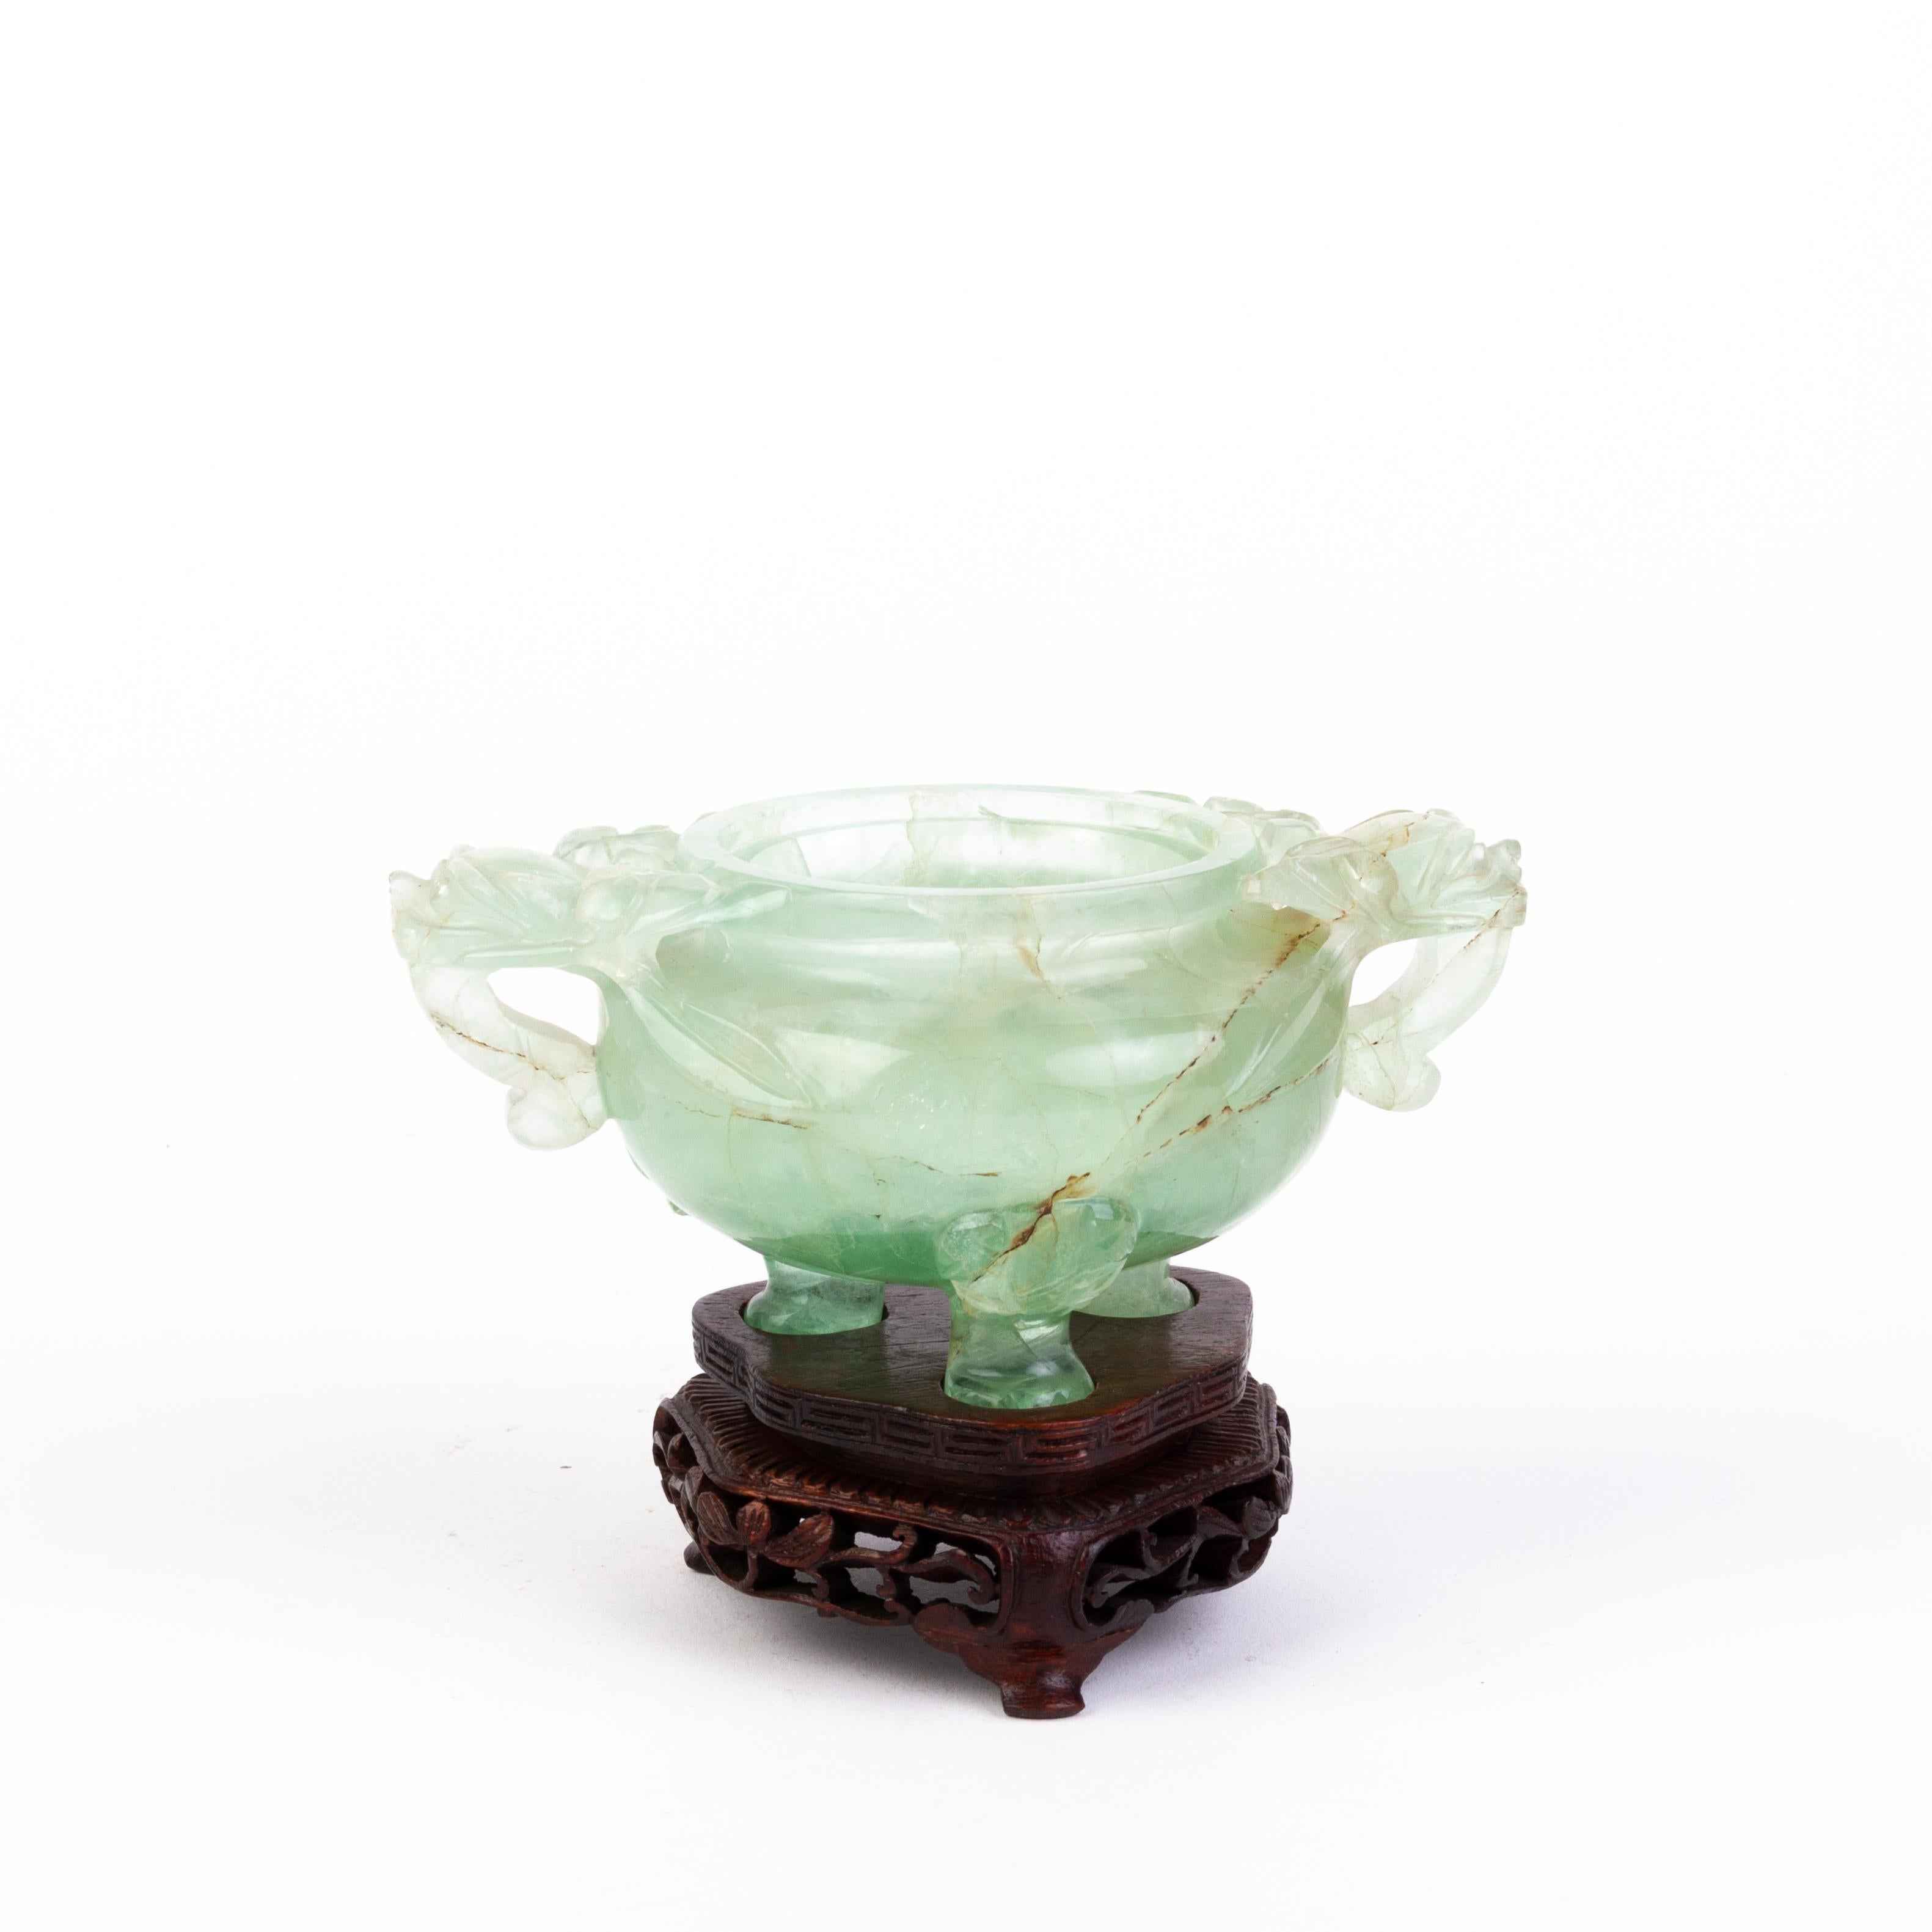 Hand-Carved Chinese Qing Dynasty Lidded Jade Censer Vase Sculpture on Stand 19th Century  For Sale